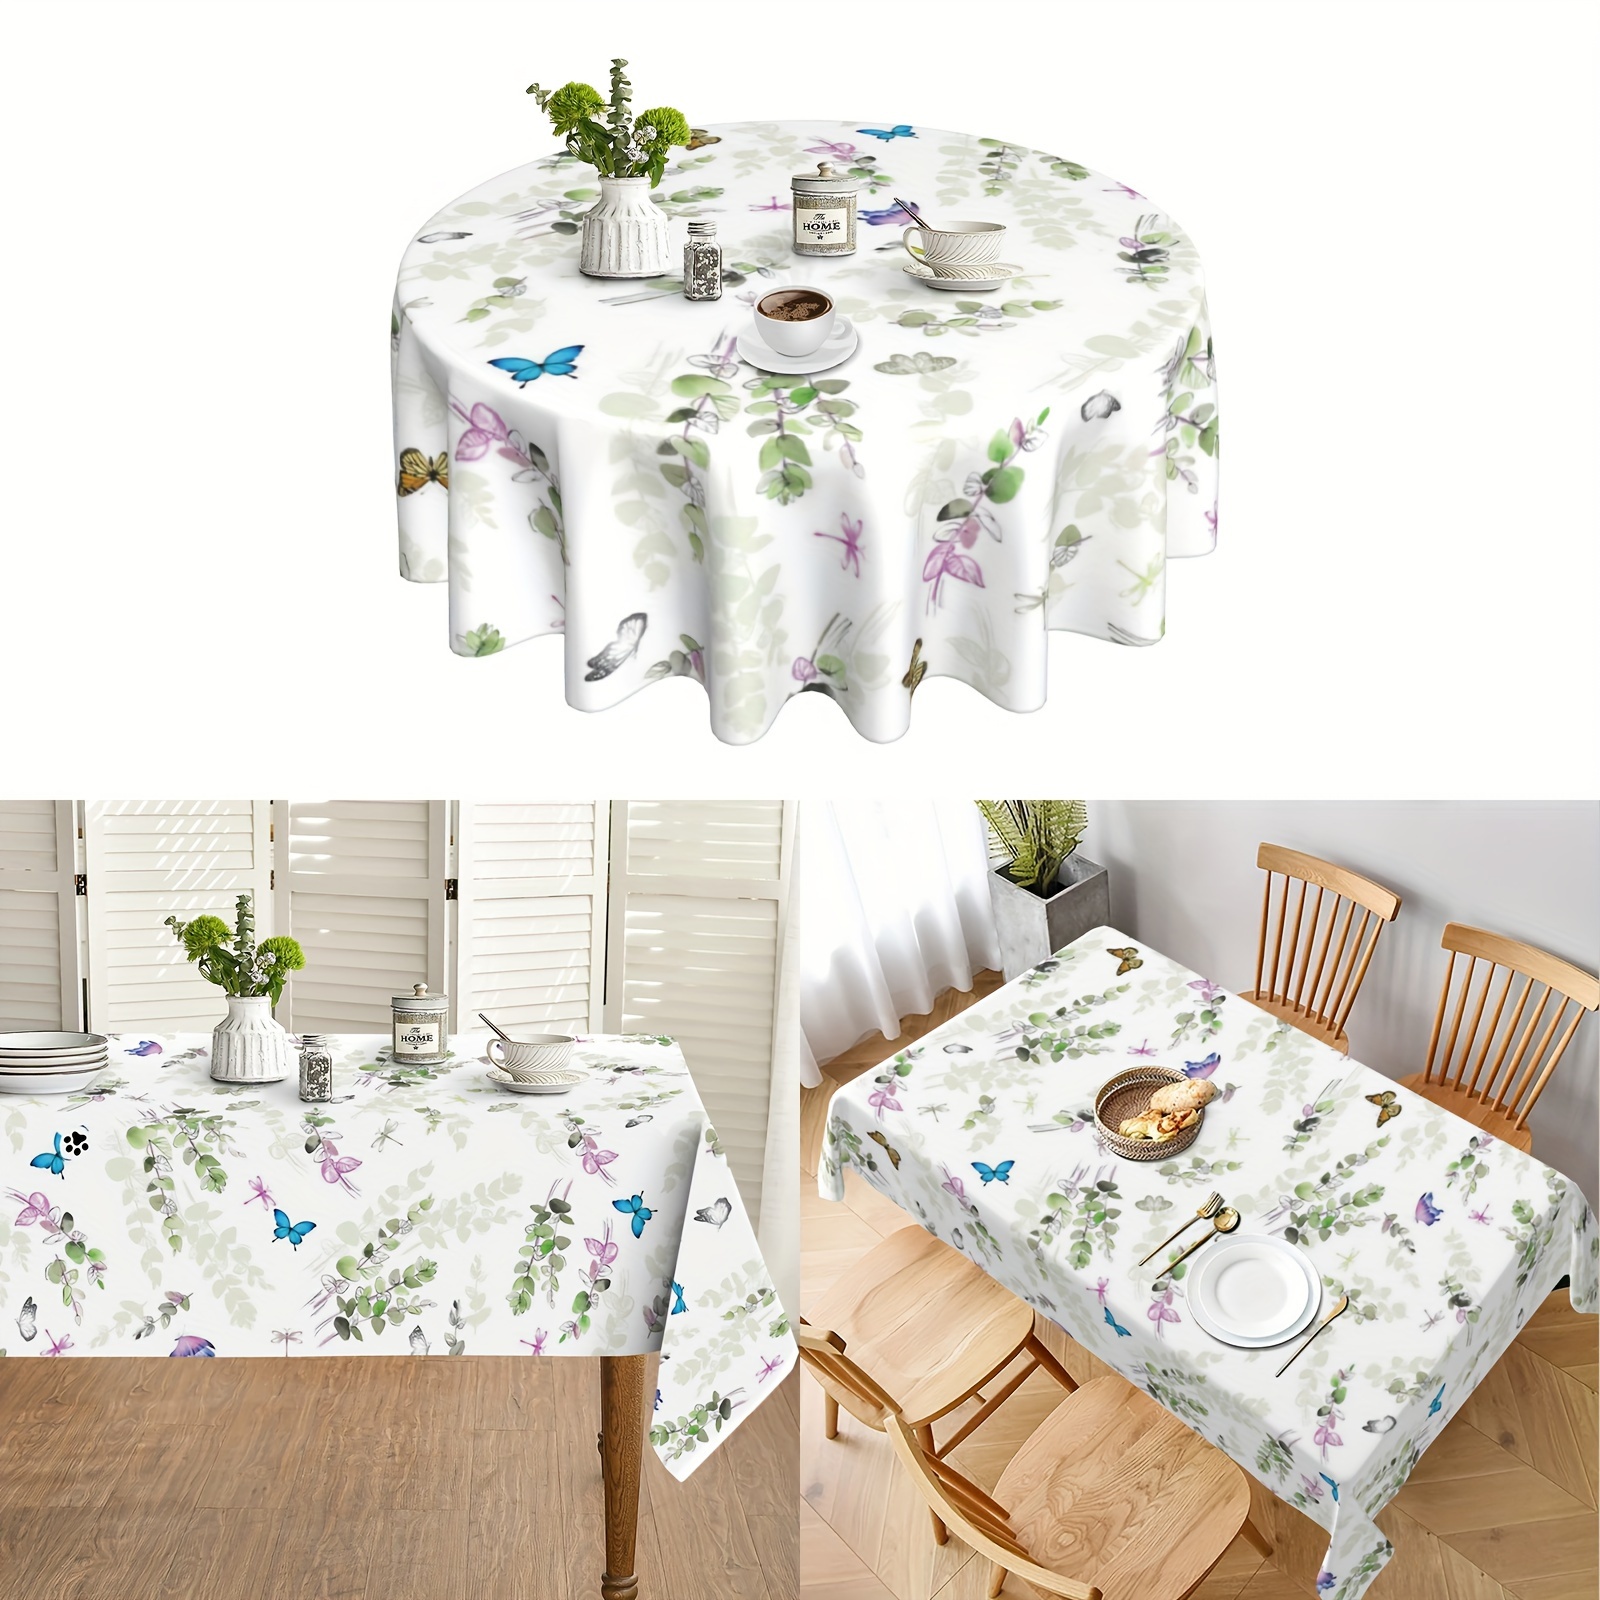 

1pc, Polyester Tablecloth, Spring Floral Teal Sage Round Table Cover, Sage Green Leaves Tablecloth, Waterproof Stain Wrinkle Free Green Tablecloth, For Home Kitchen Dining Party Decoration